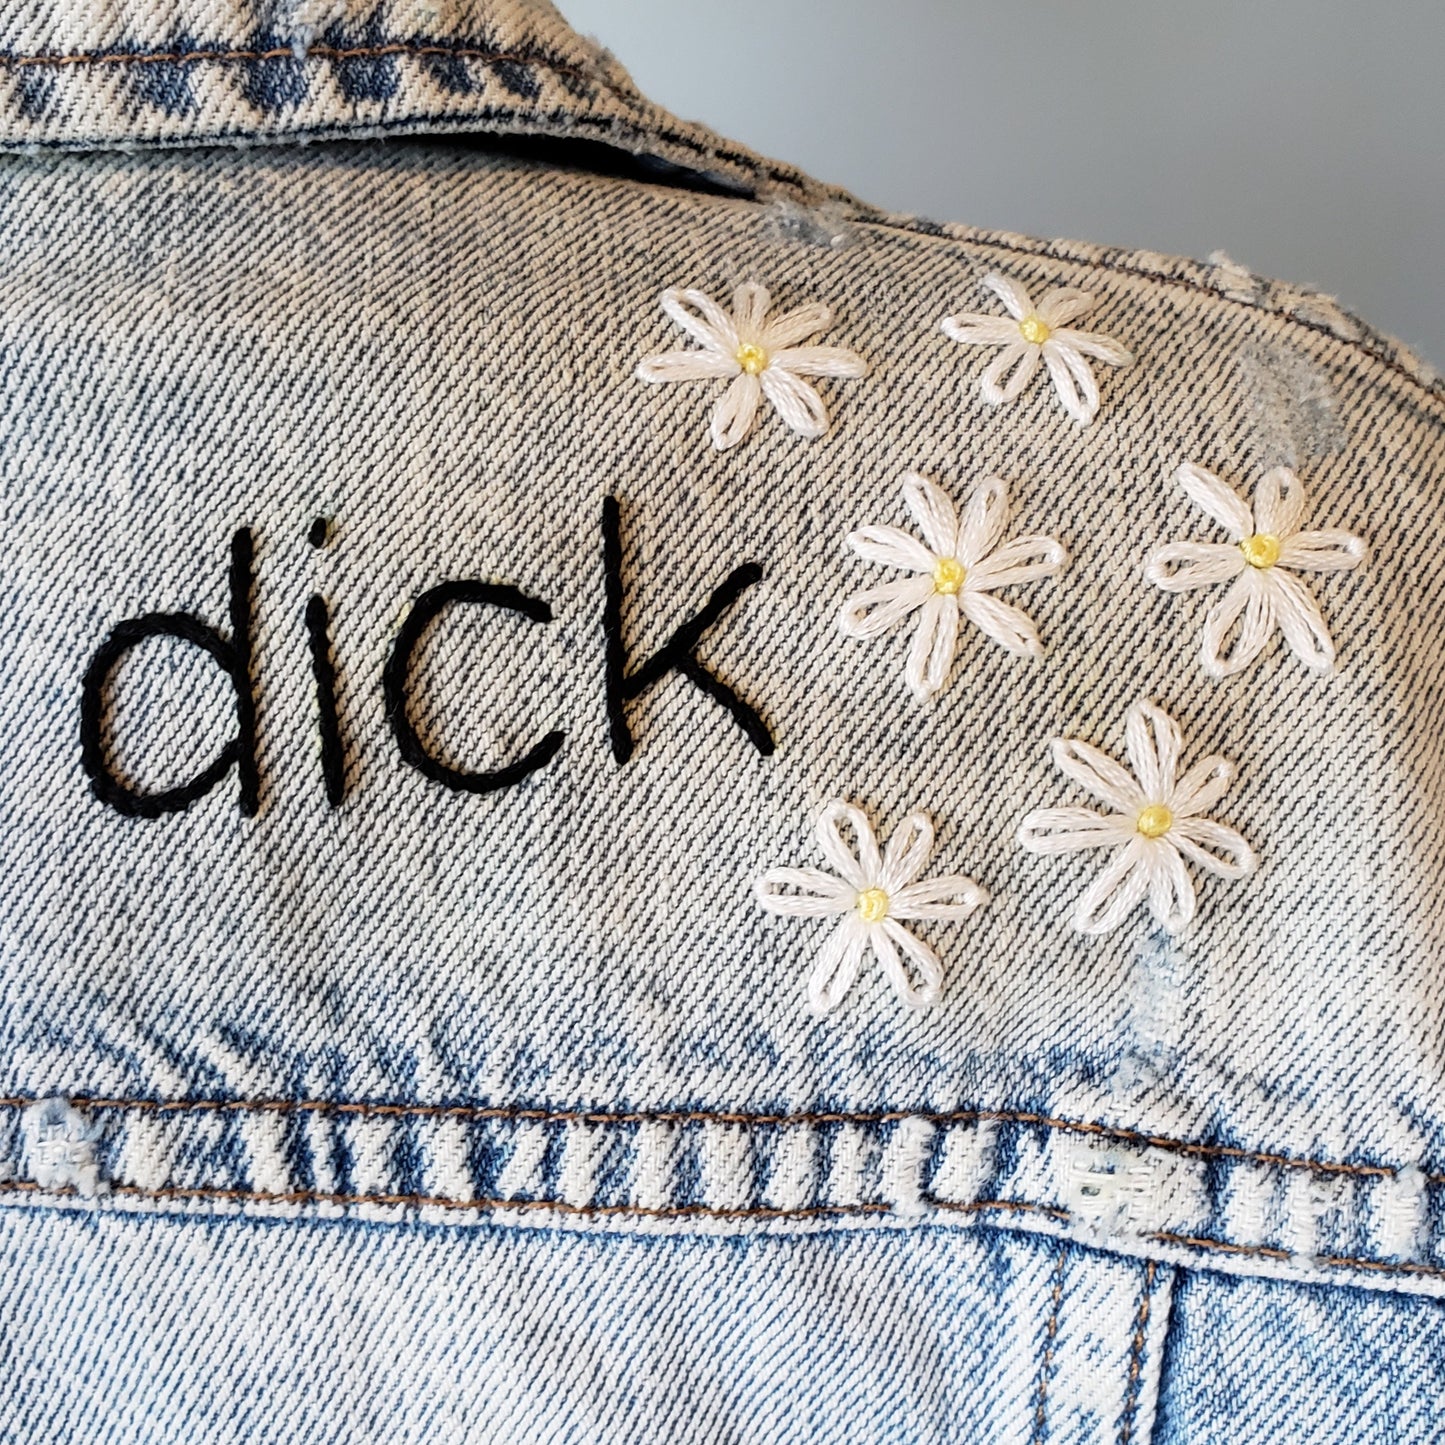 A detail shot of the daisies on the acid wash jacket. We can see the word "dick" but this shot is about the 6 flowers that sit beside the text. Each flower has a yellow french knot in the middle, and white petals. Most flowers have 7 petals.